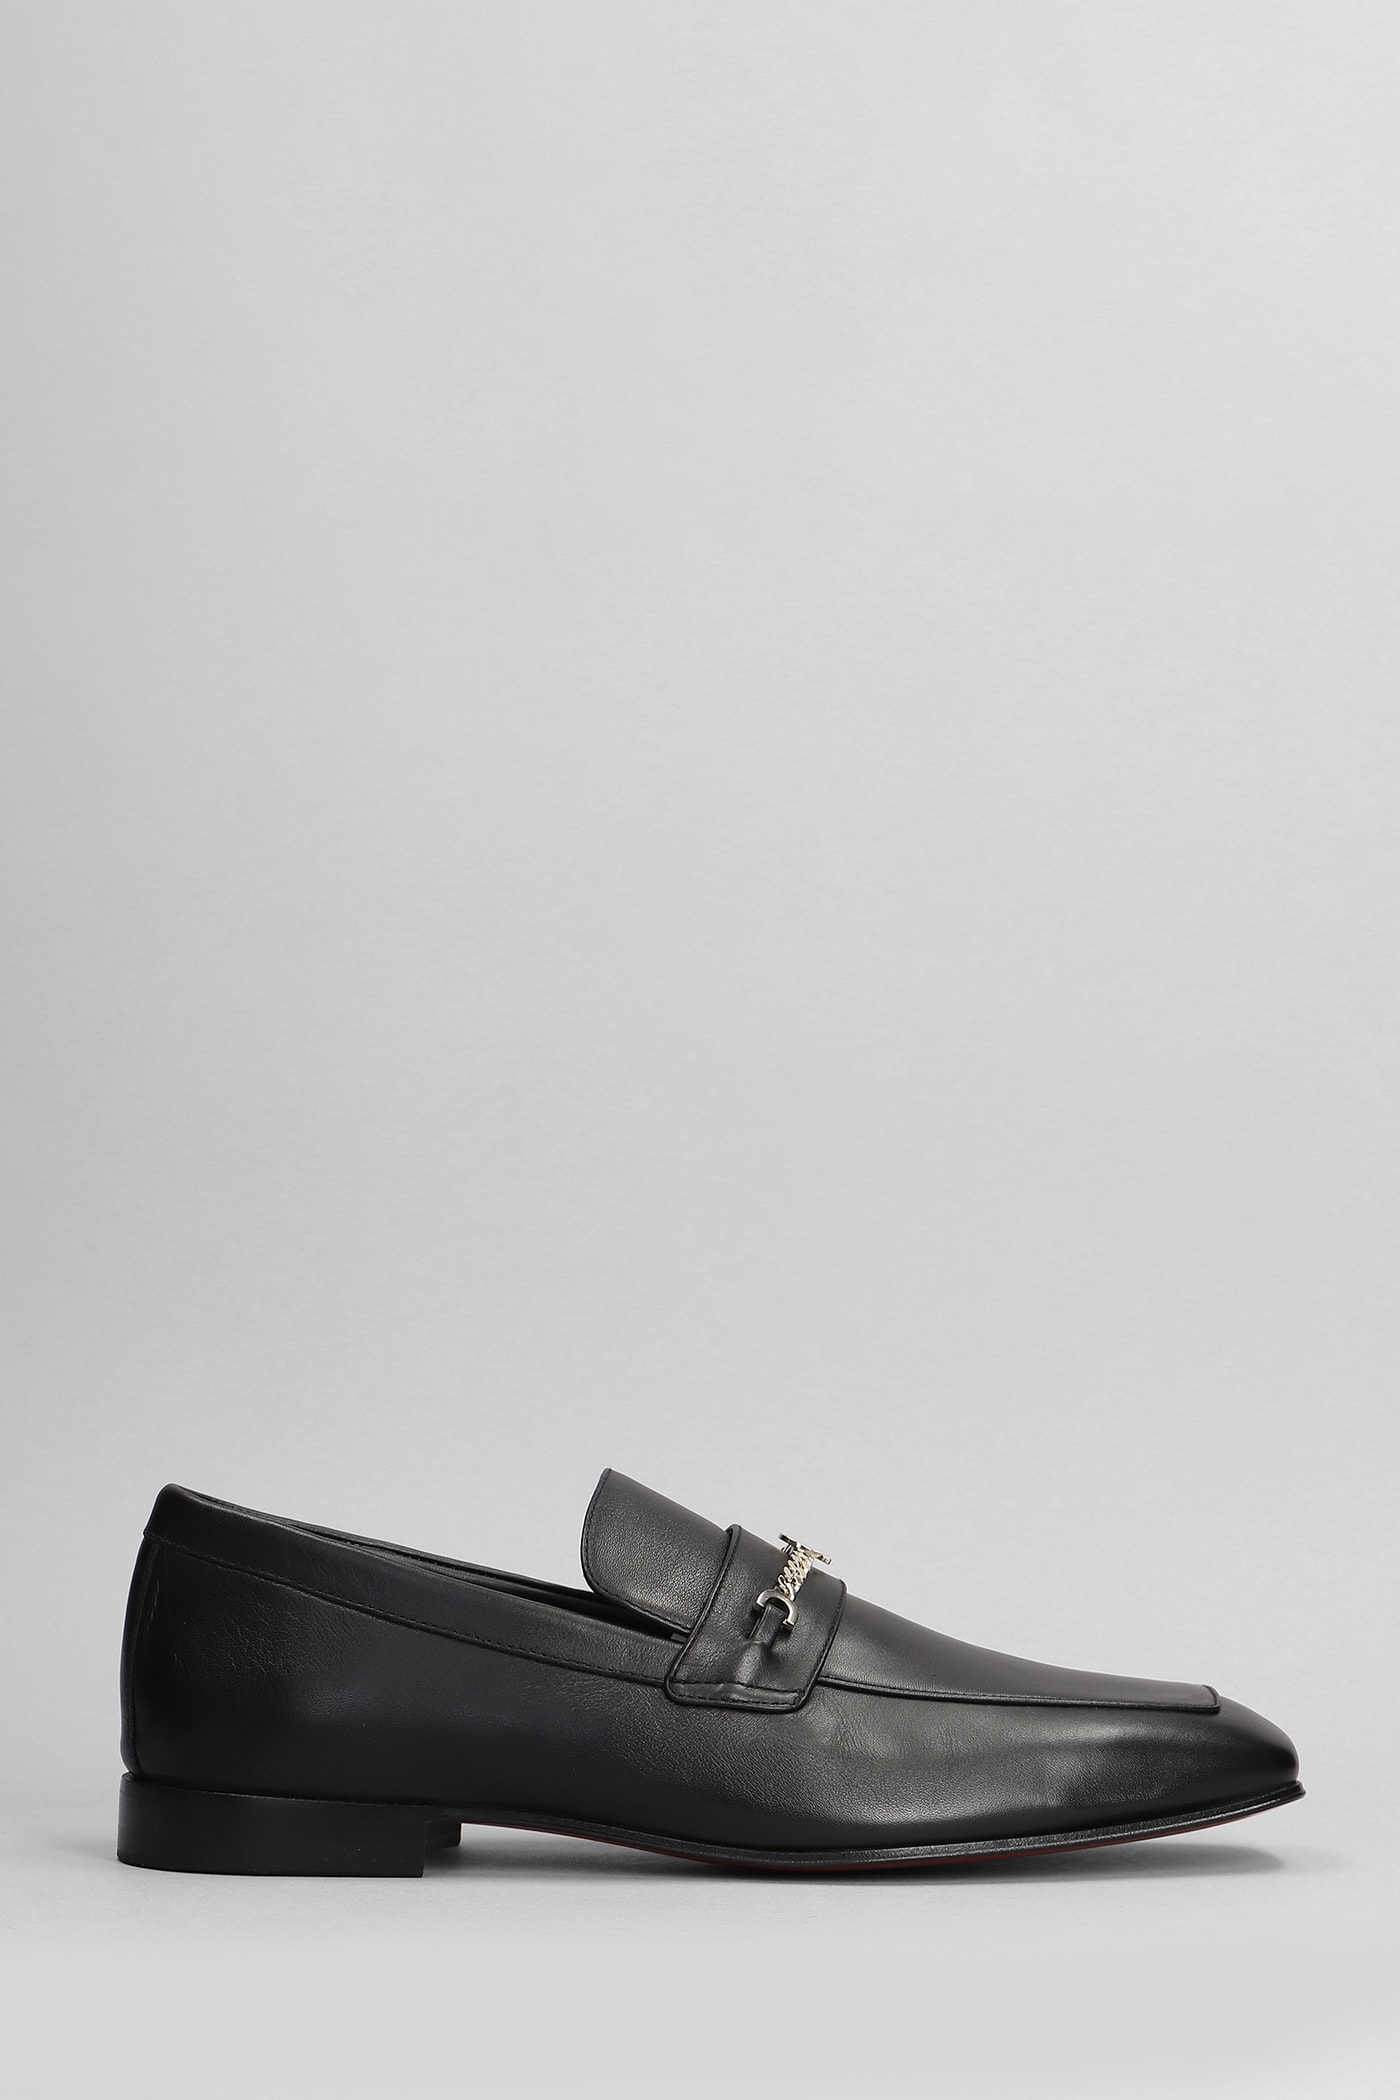 Mj Moc Loafers In Black Leather